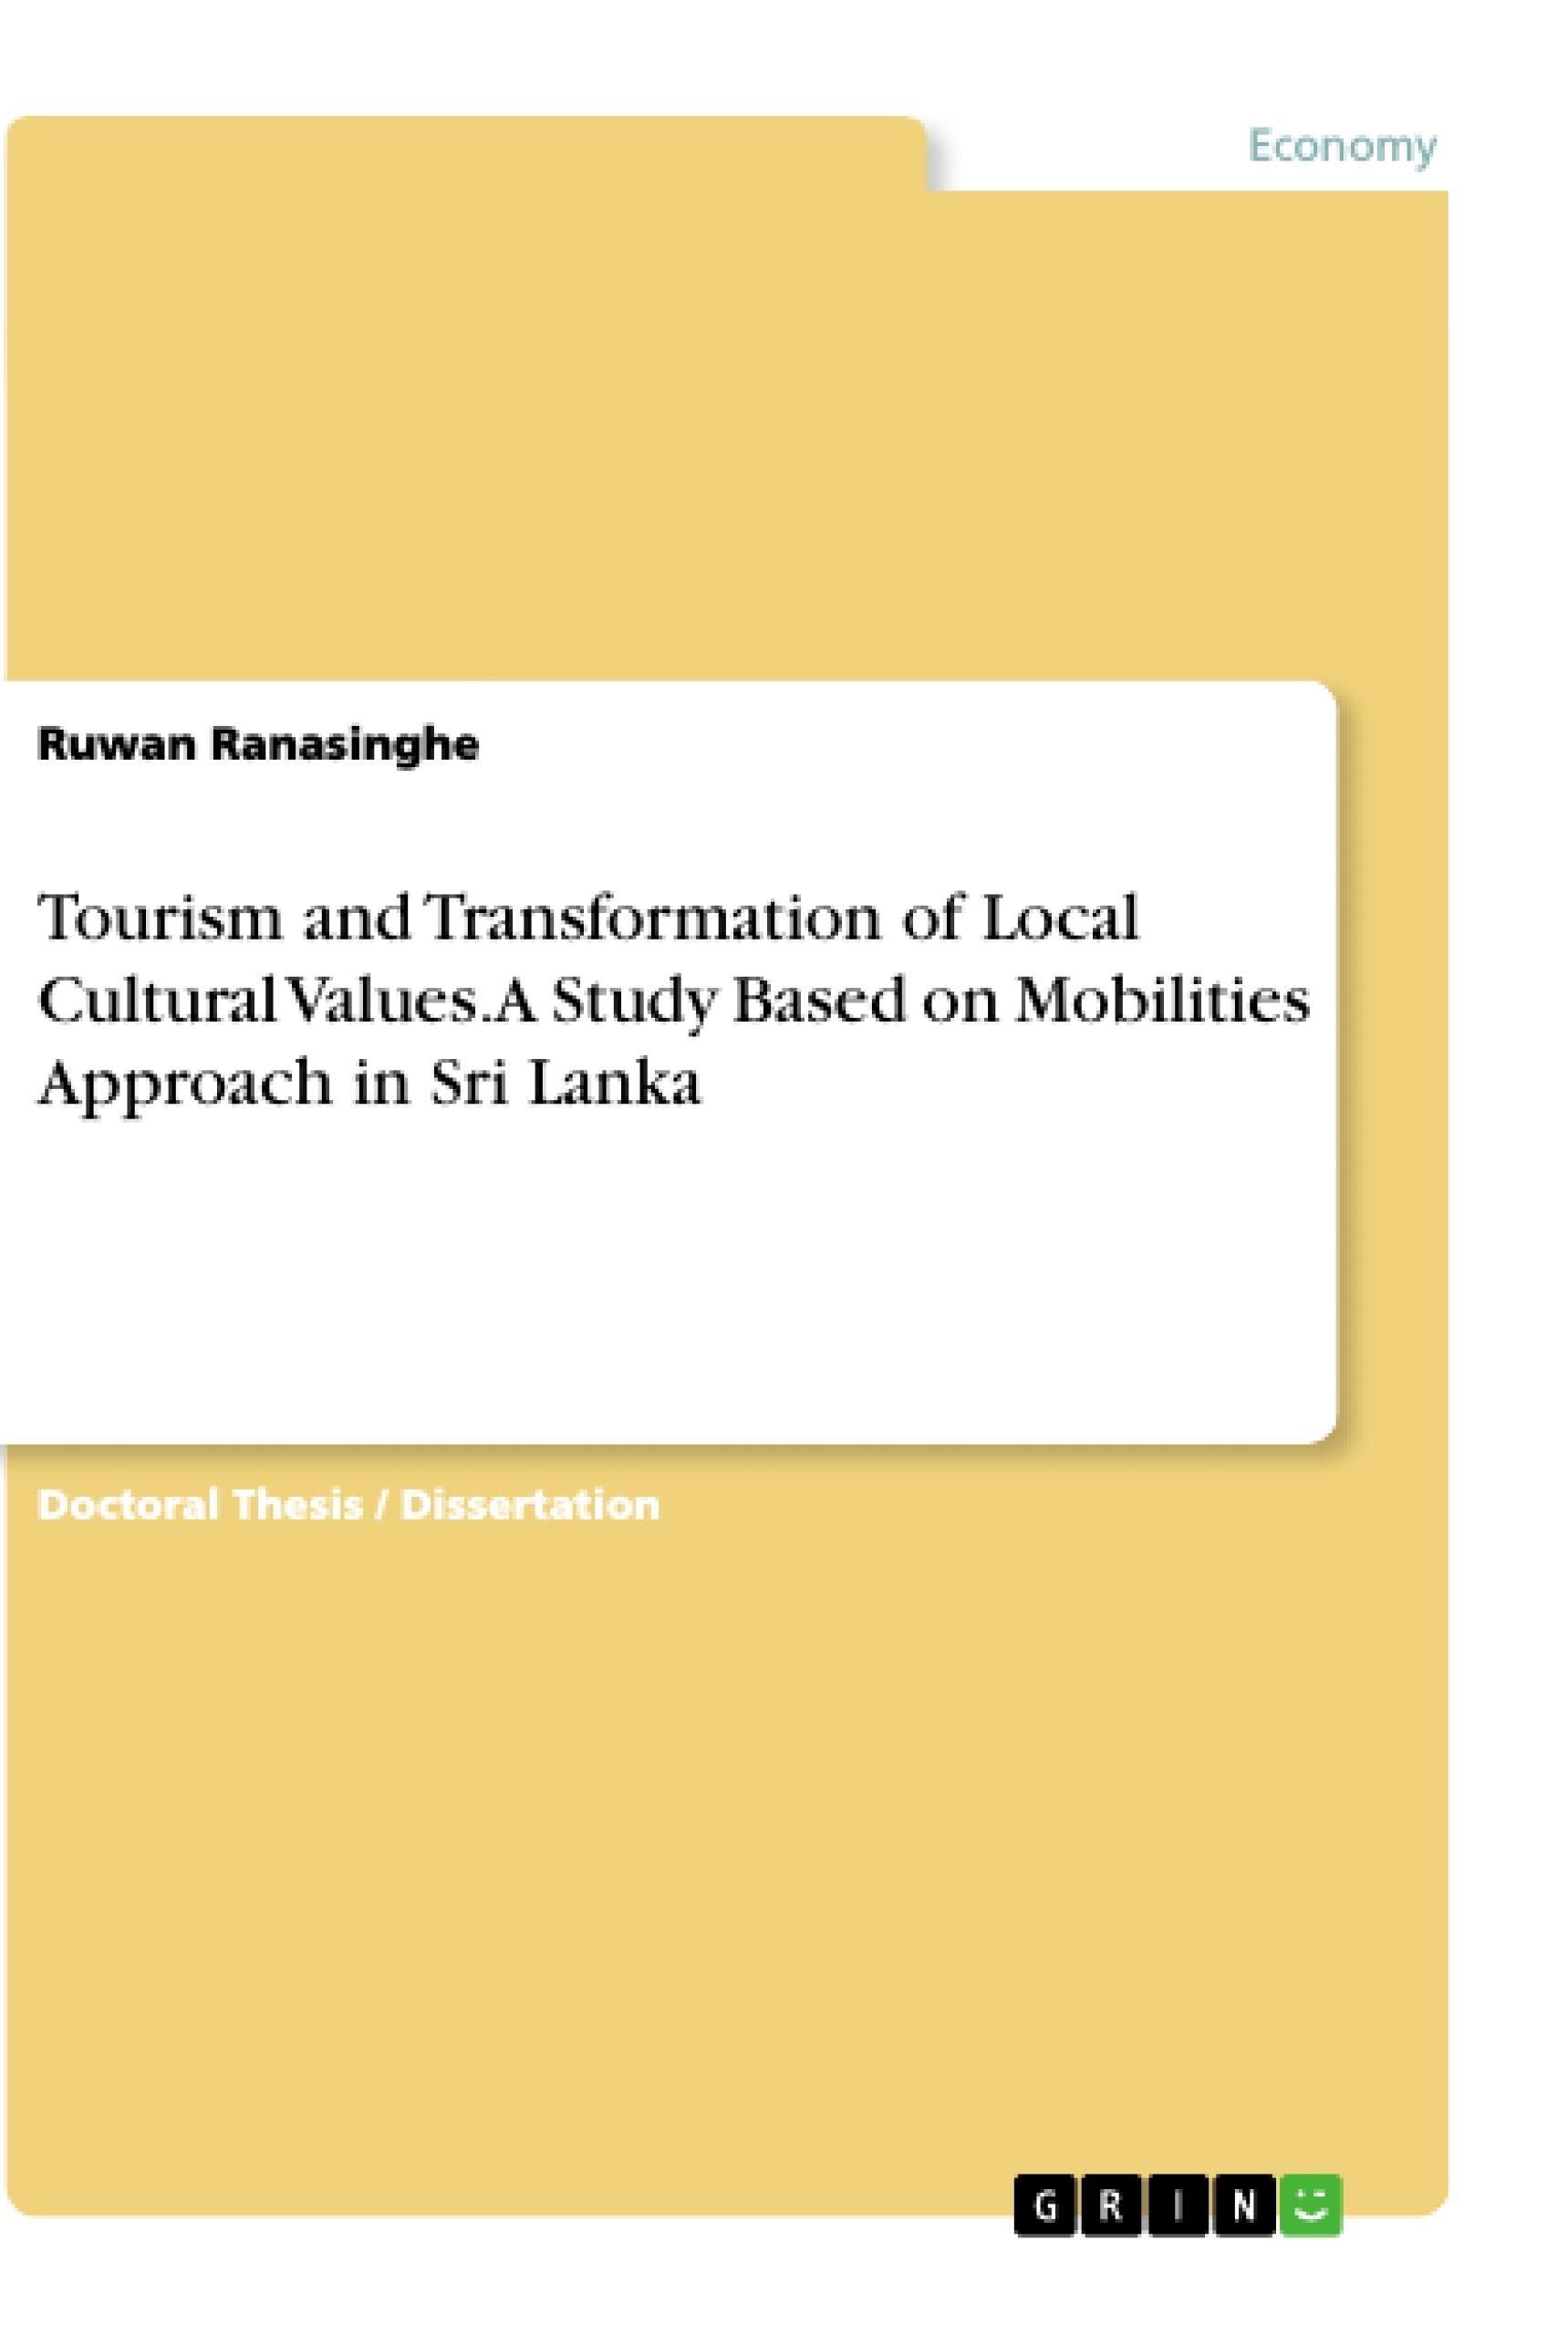 Title: Tourism and Transformation of Local Cultural Values. A Study Based on Mobilities Approach in Sri Lanka